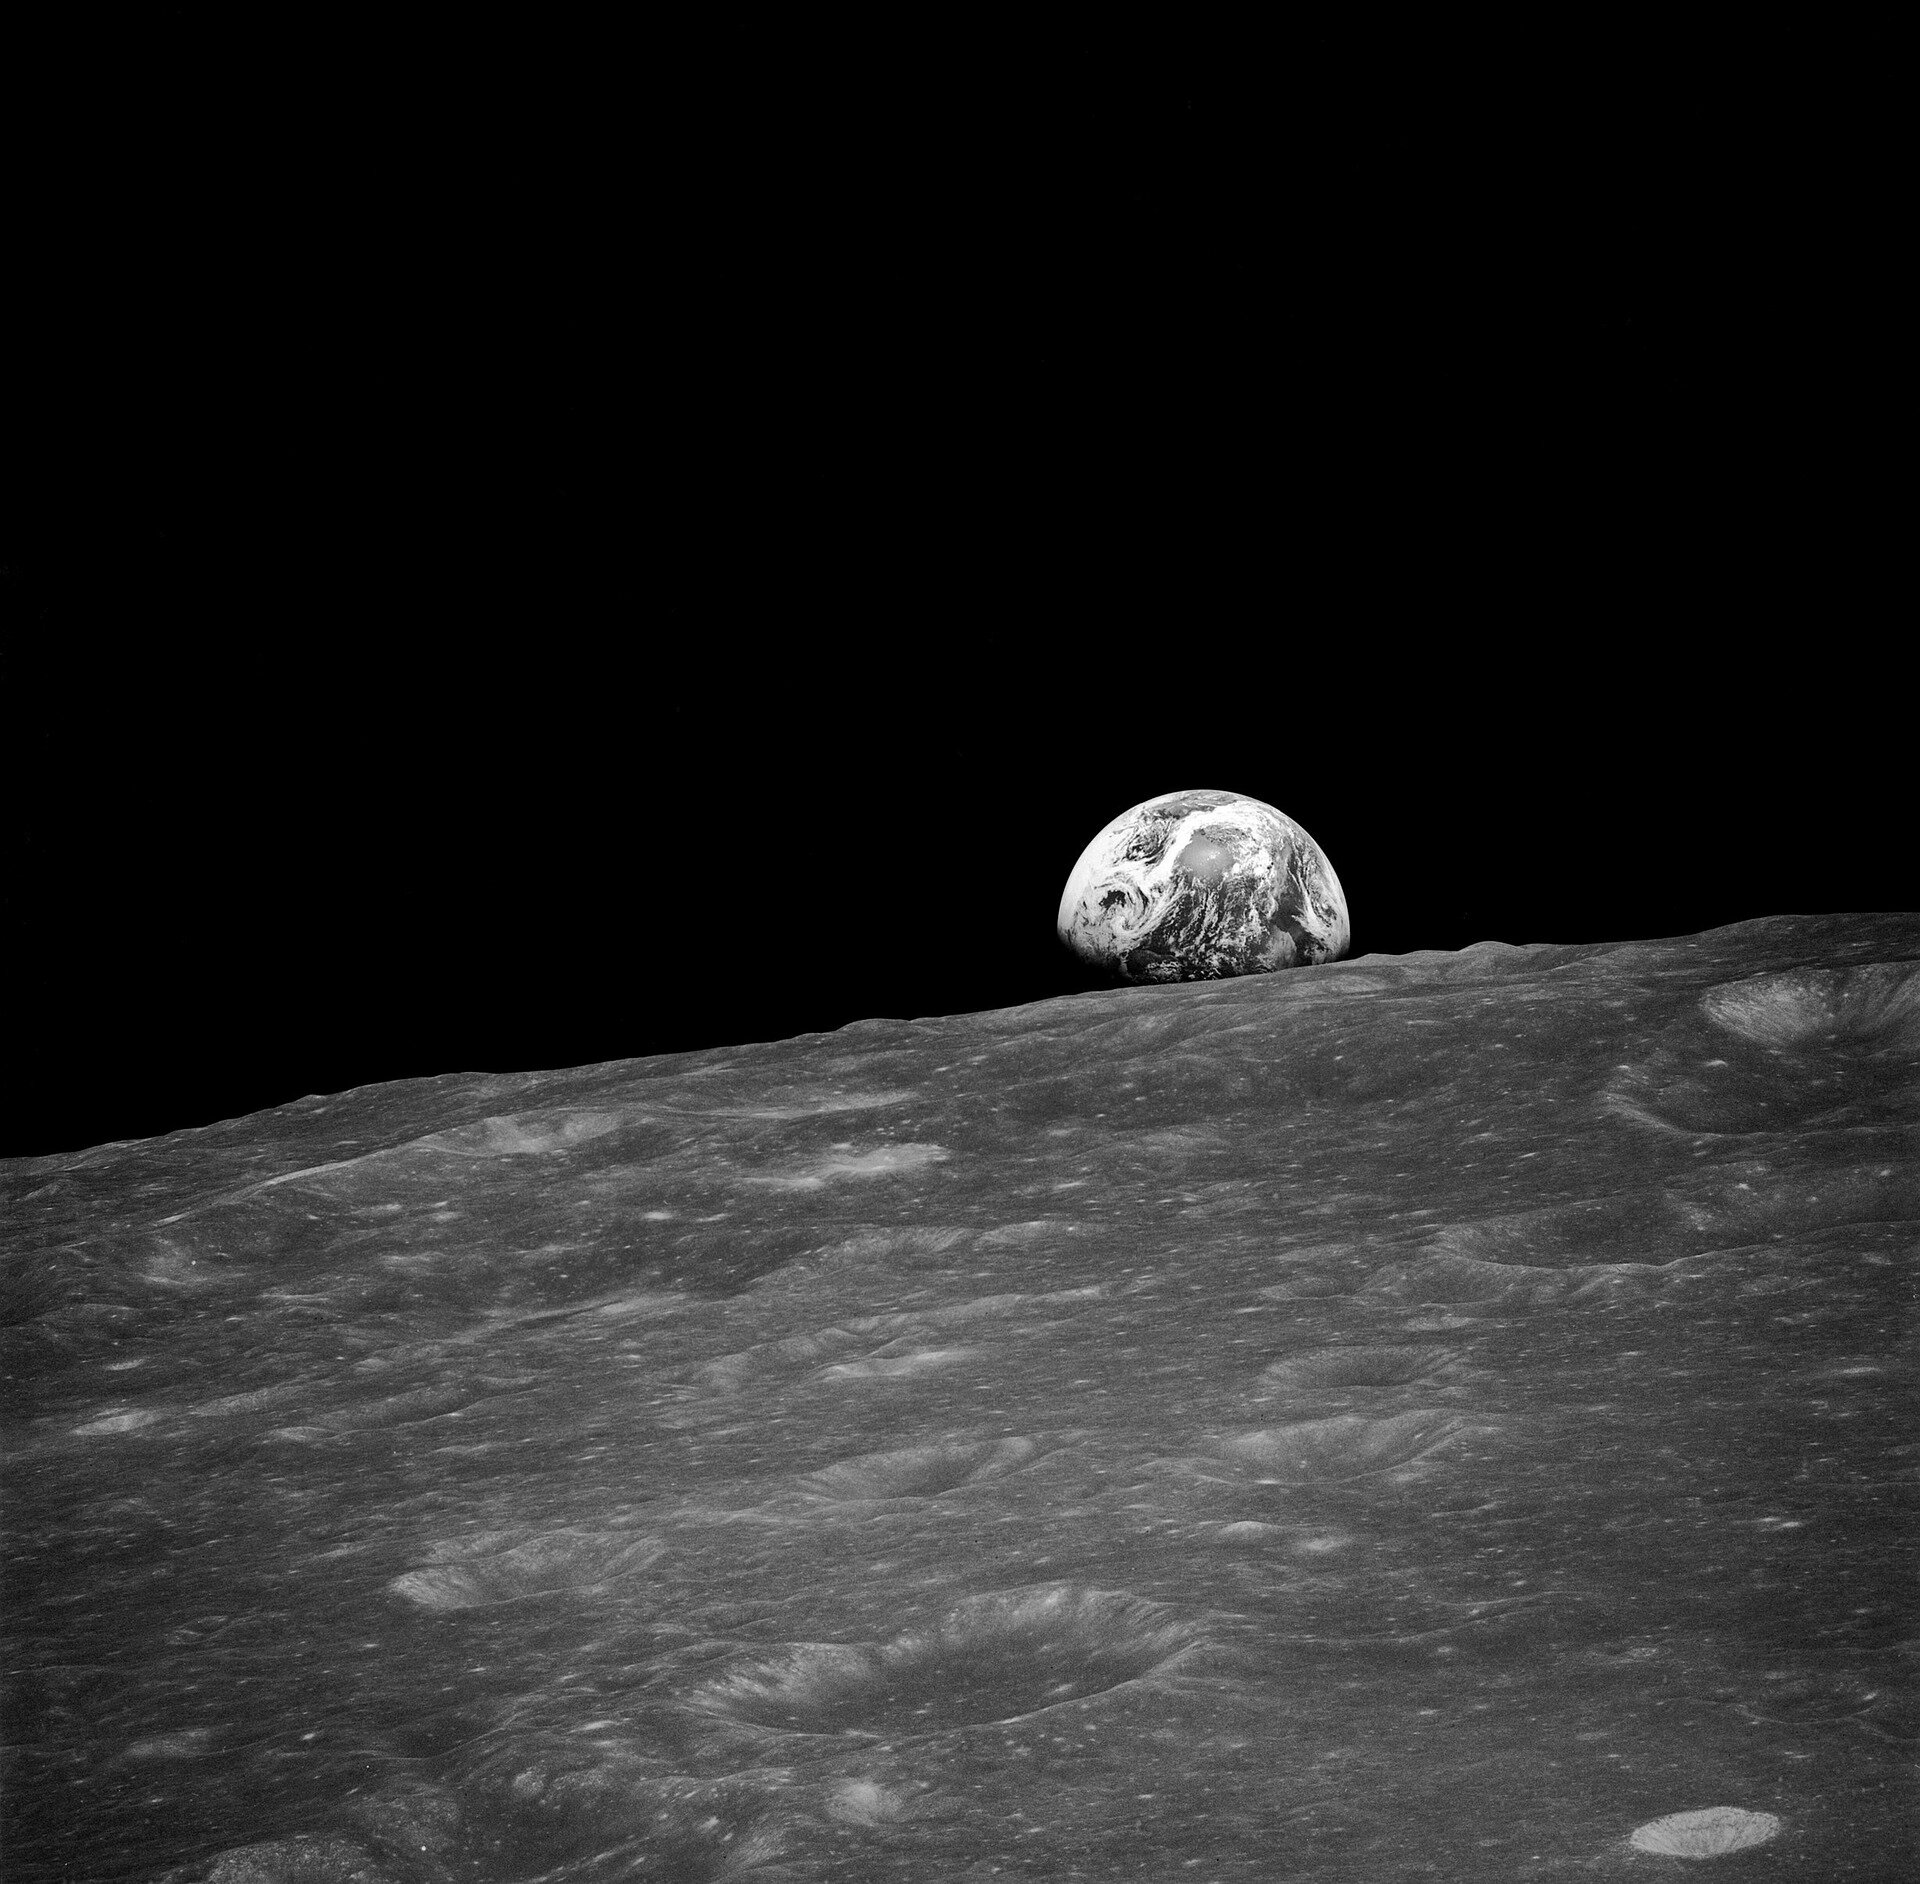 Hordes of Earth's toughest creatures may now be living on Moon